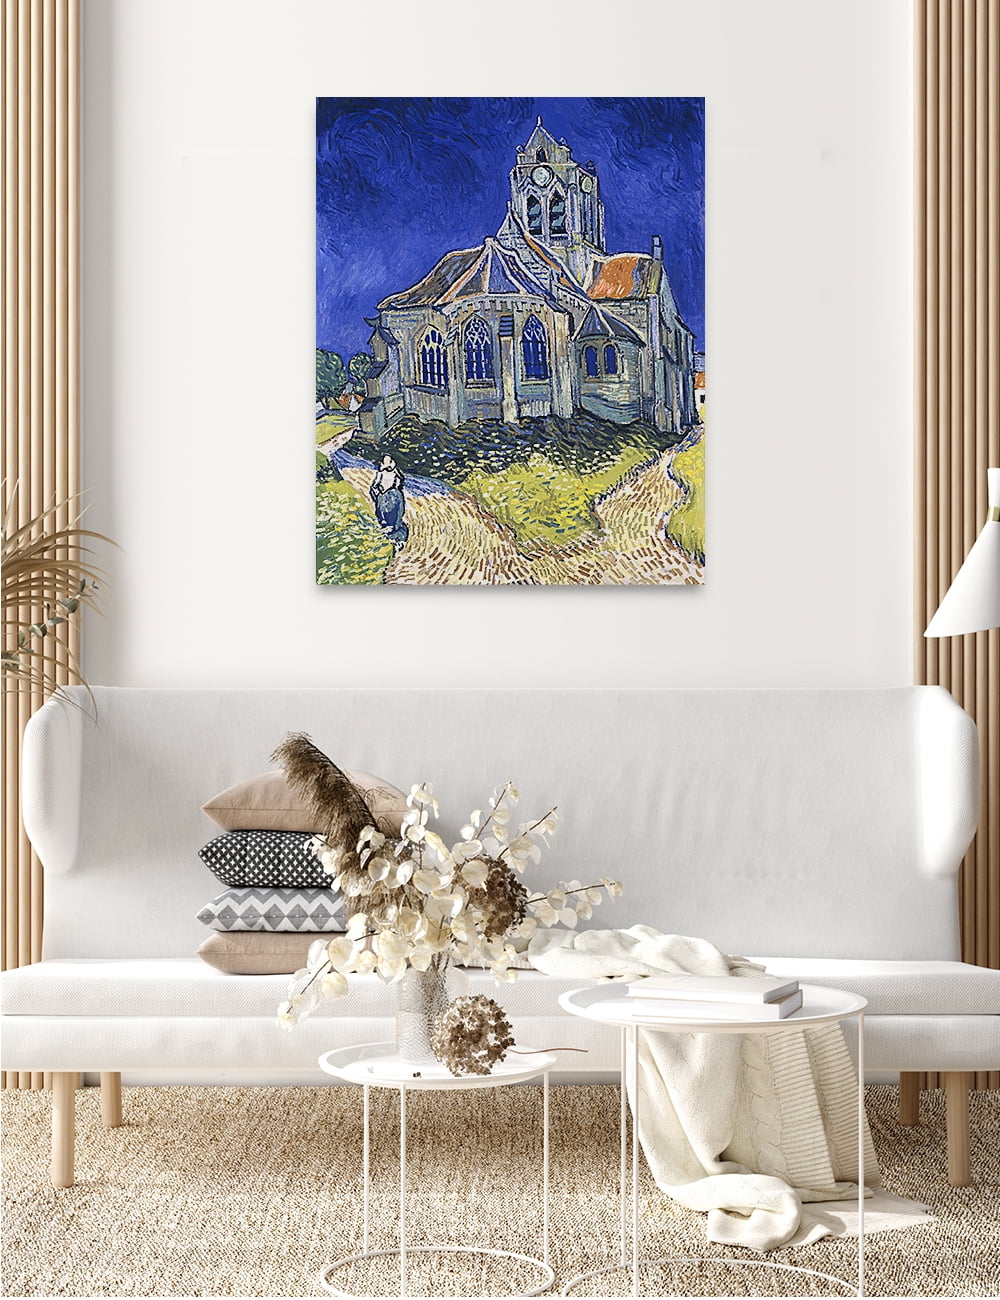 DECORARTS The Church at Auvers, Vincent Van Gogh Art Reproduction. Giclee  Canvas Prints Wall Art for Home Decor 30x24